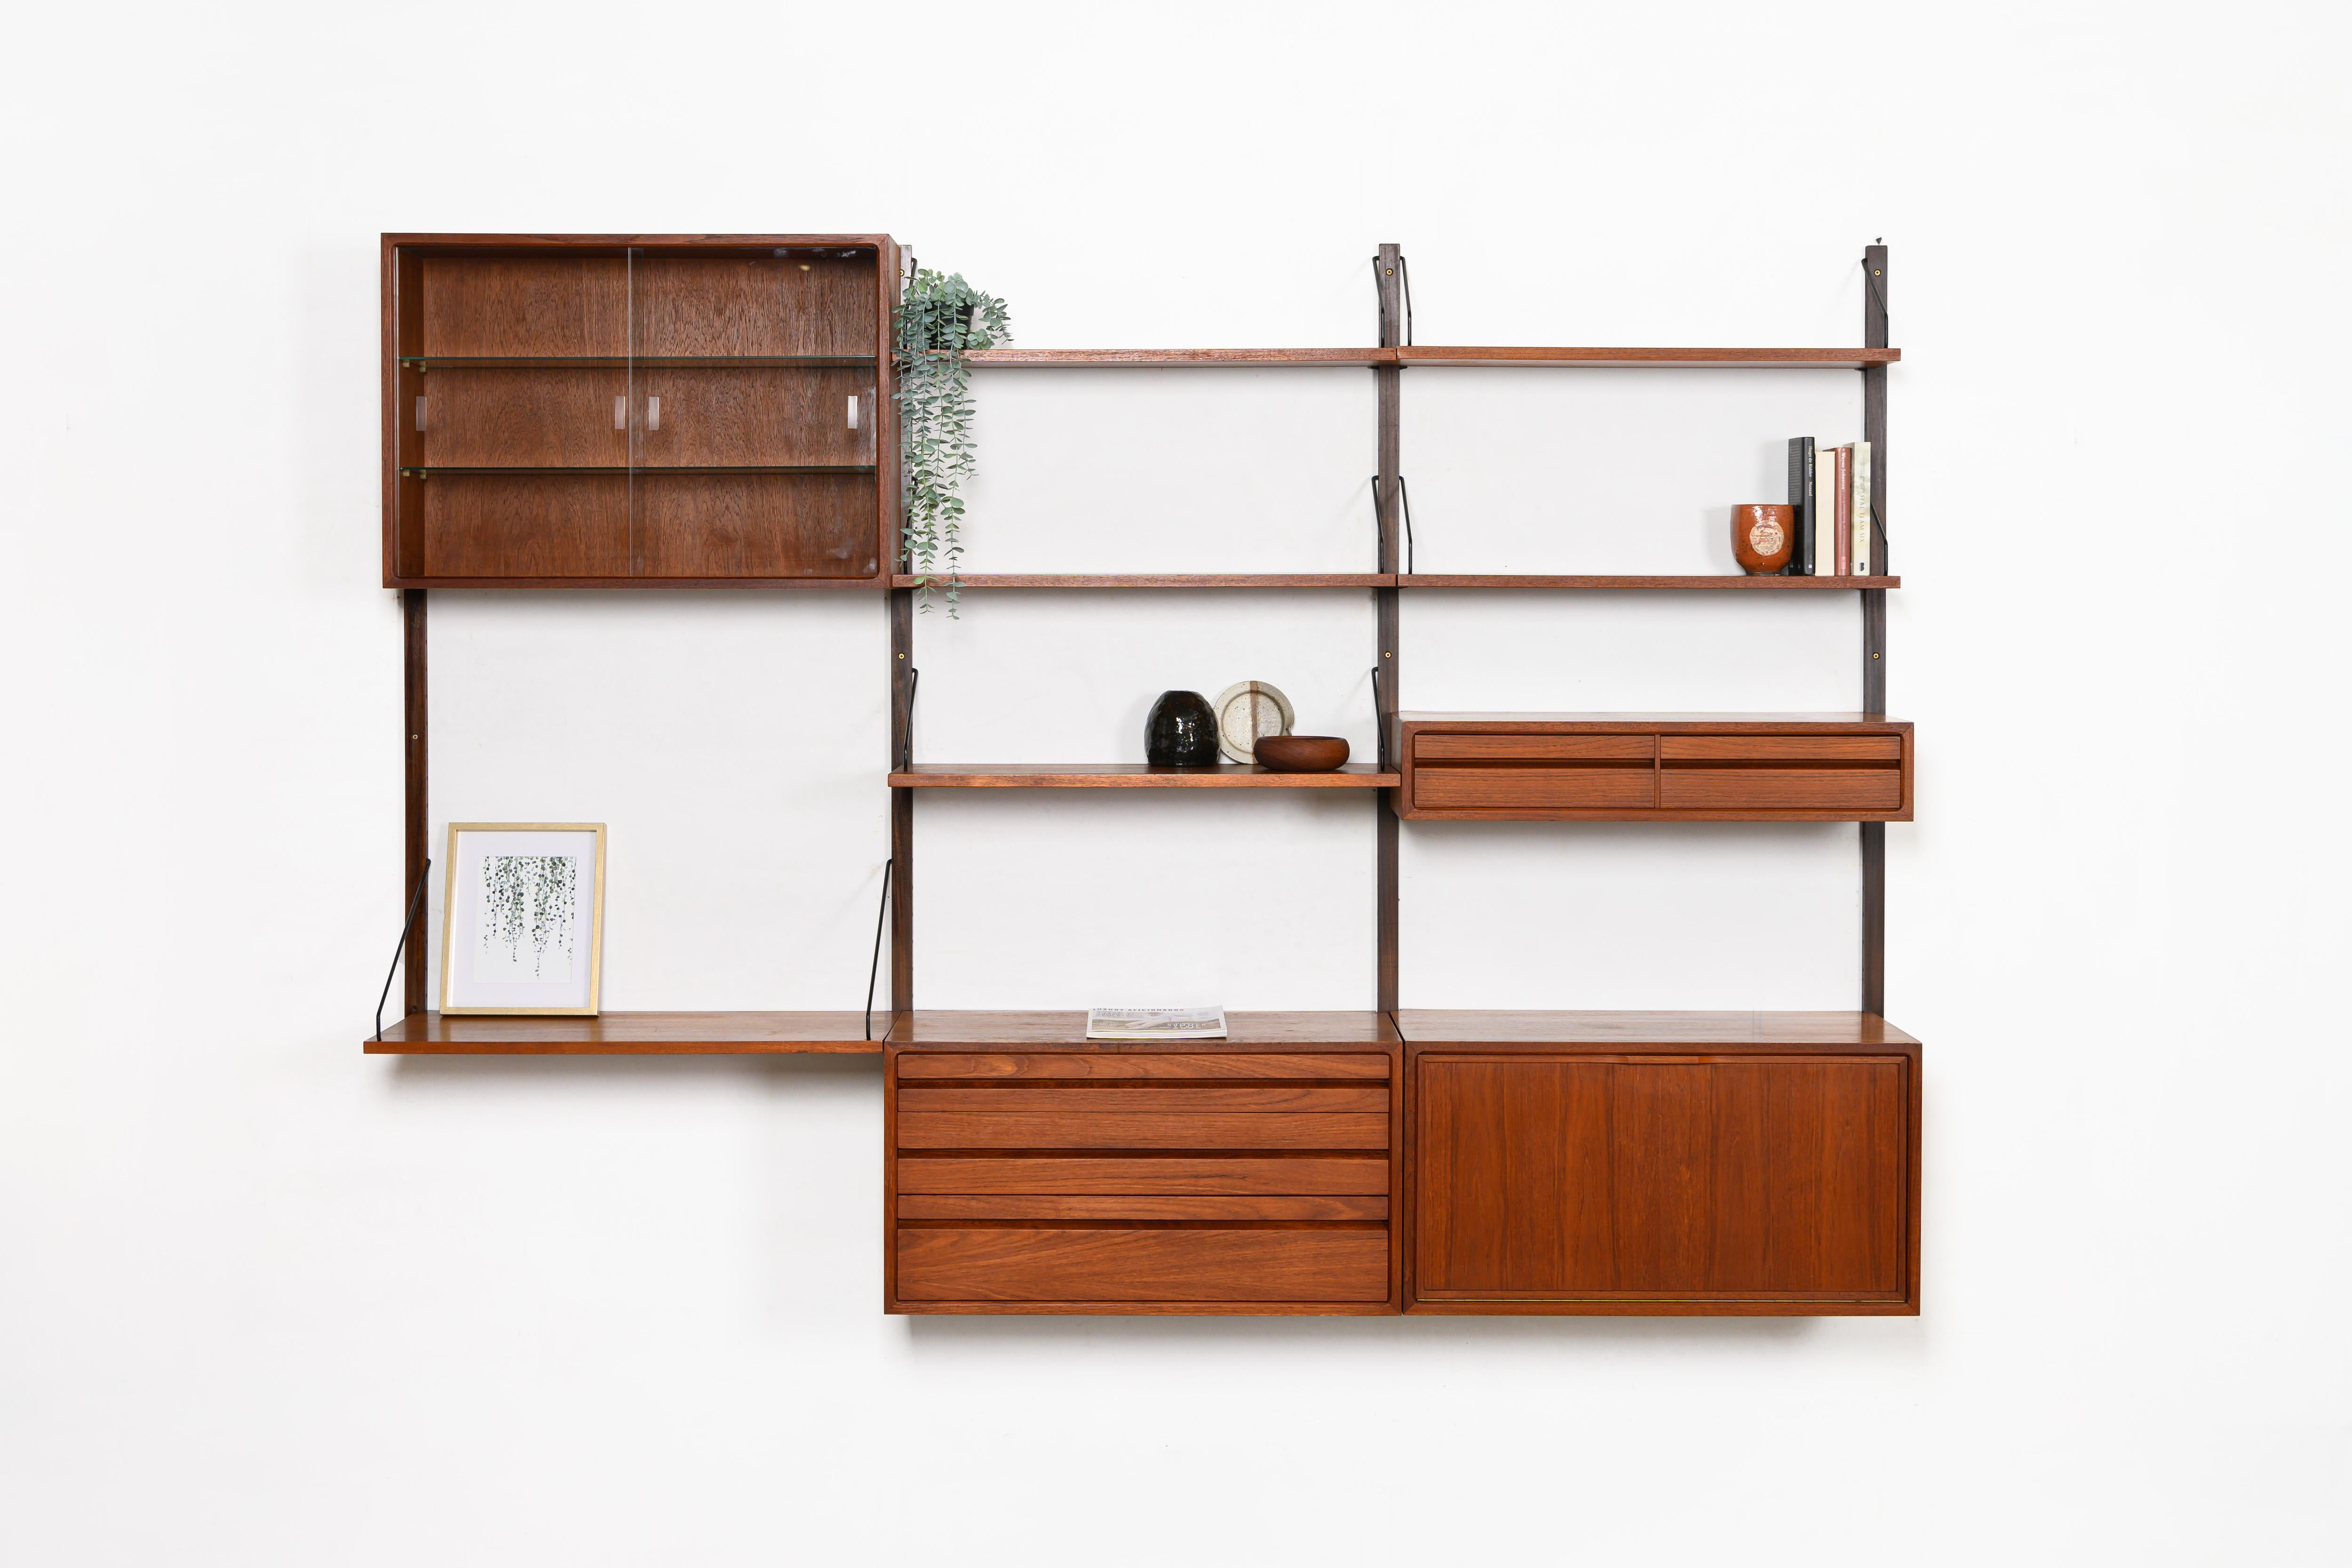 Danish modular wall unit by Poul Cadovius for Royal System. This teak setup has two storage cabinets, one display cabinet, one small drawers cabinet, one desk shelf and five bookshelves. Always adaptable and further expandable.

Dimensions:
W: 244